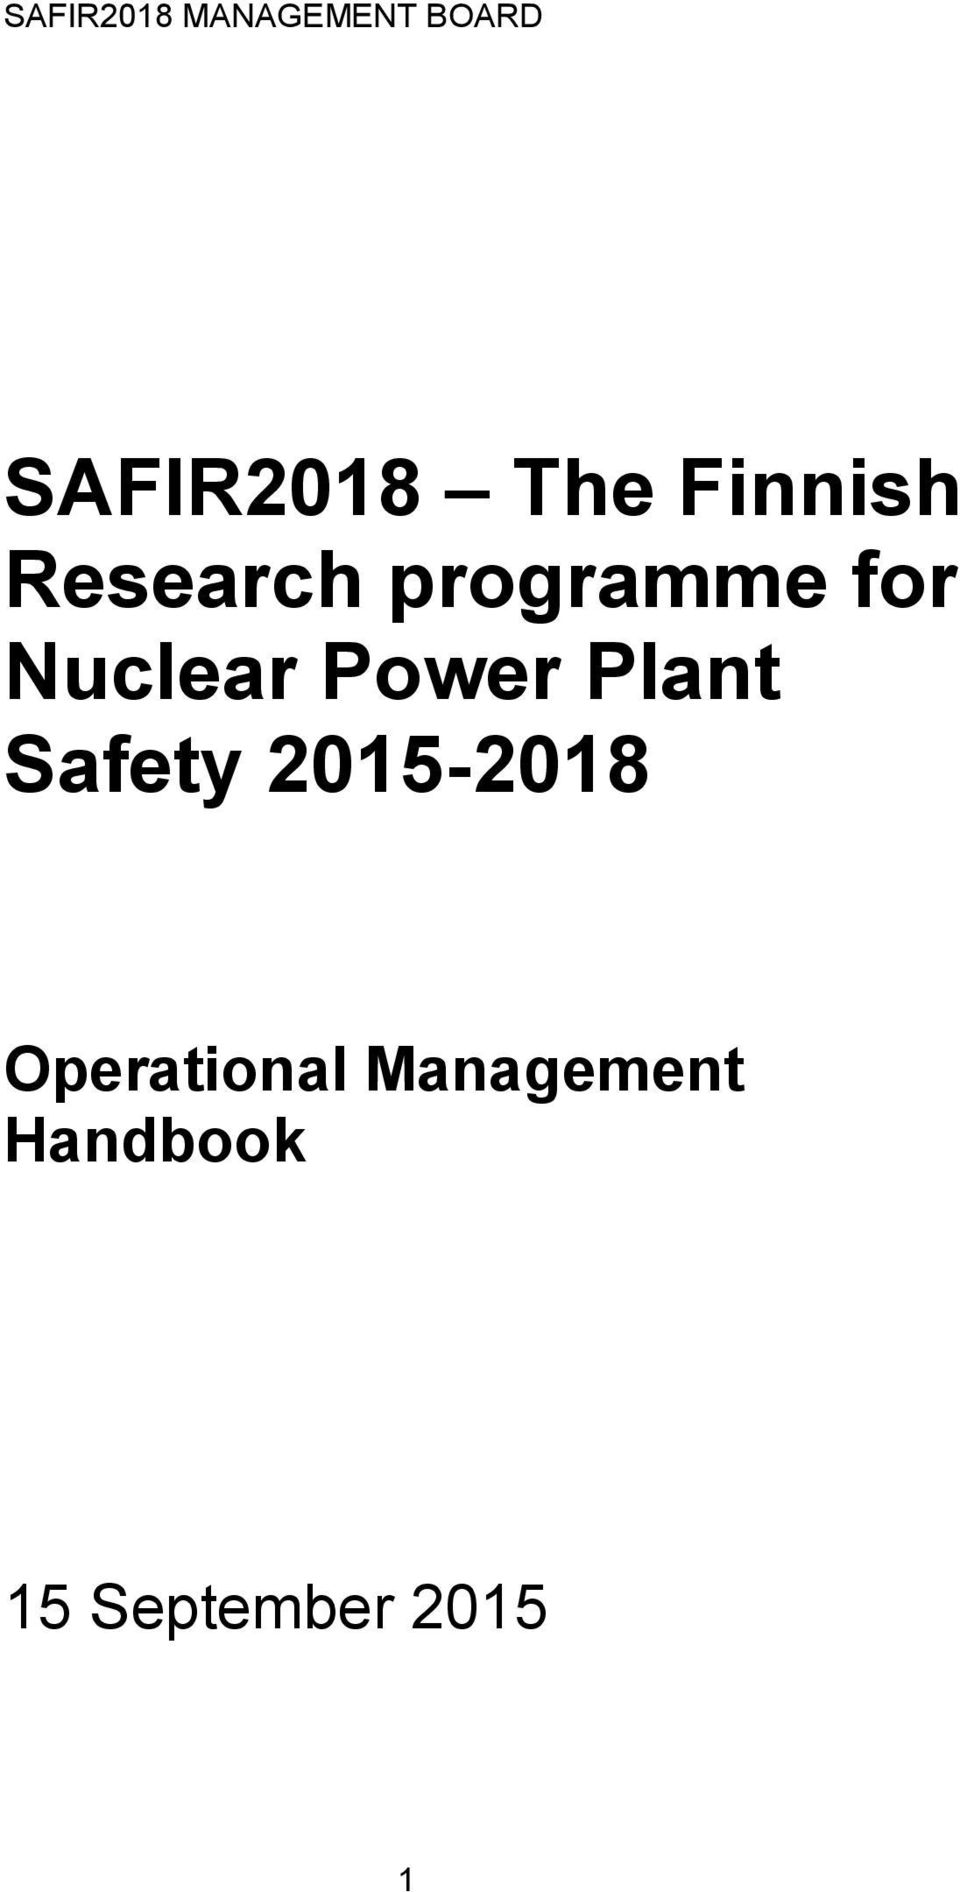 Nuclear Power Plant Safety 2015-2018